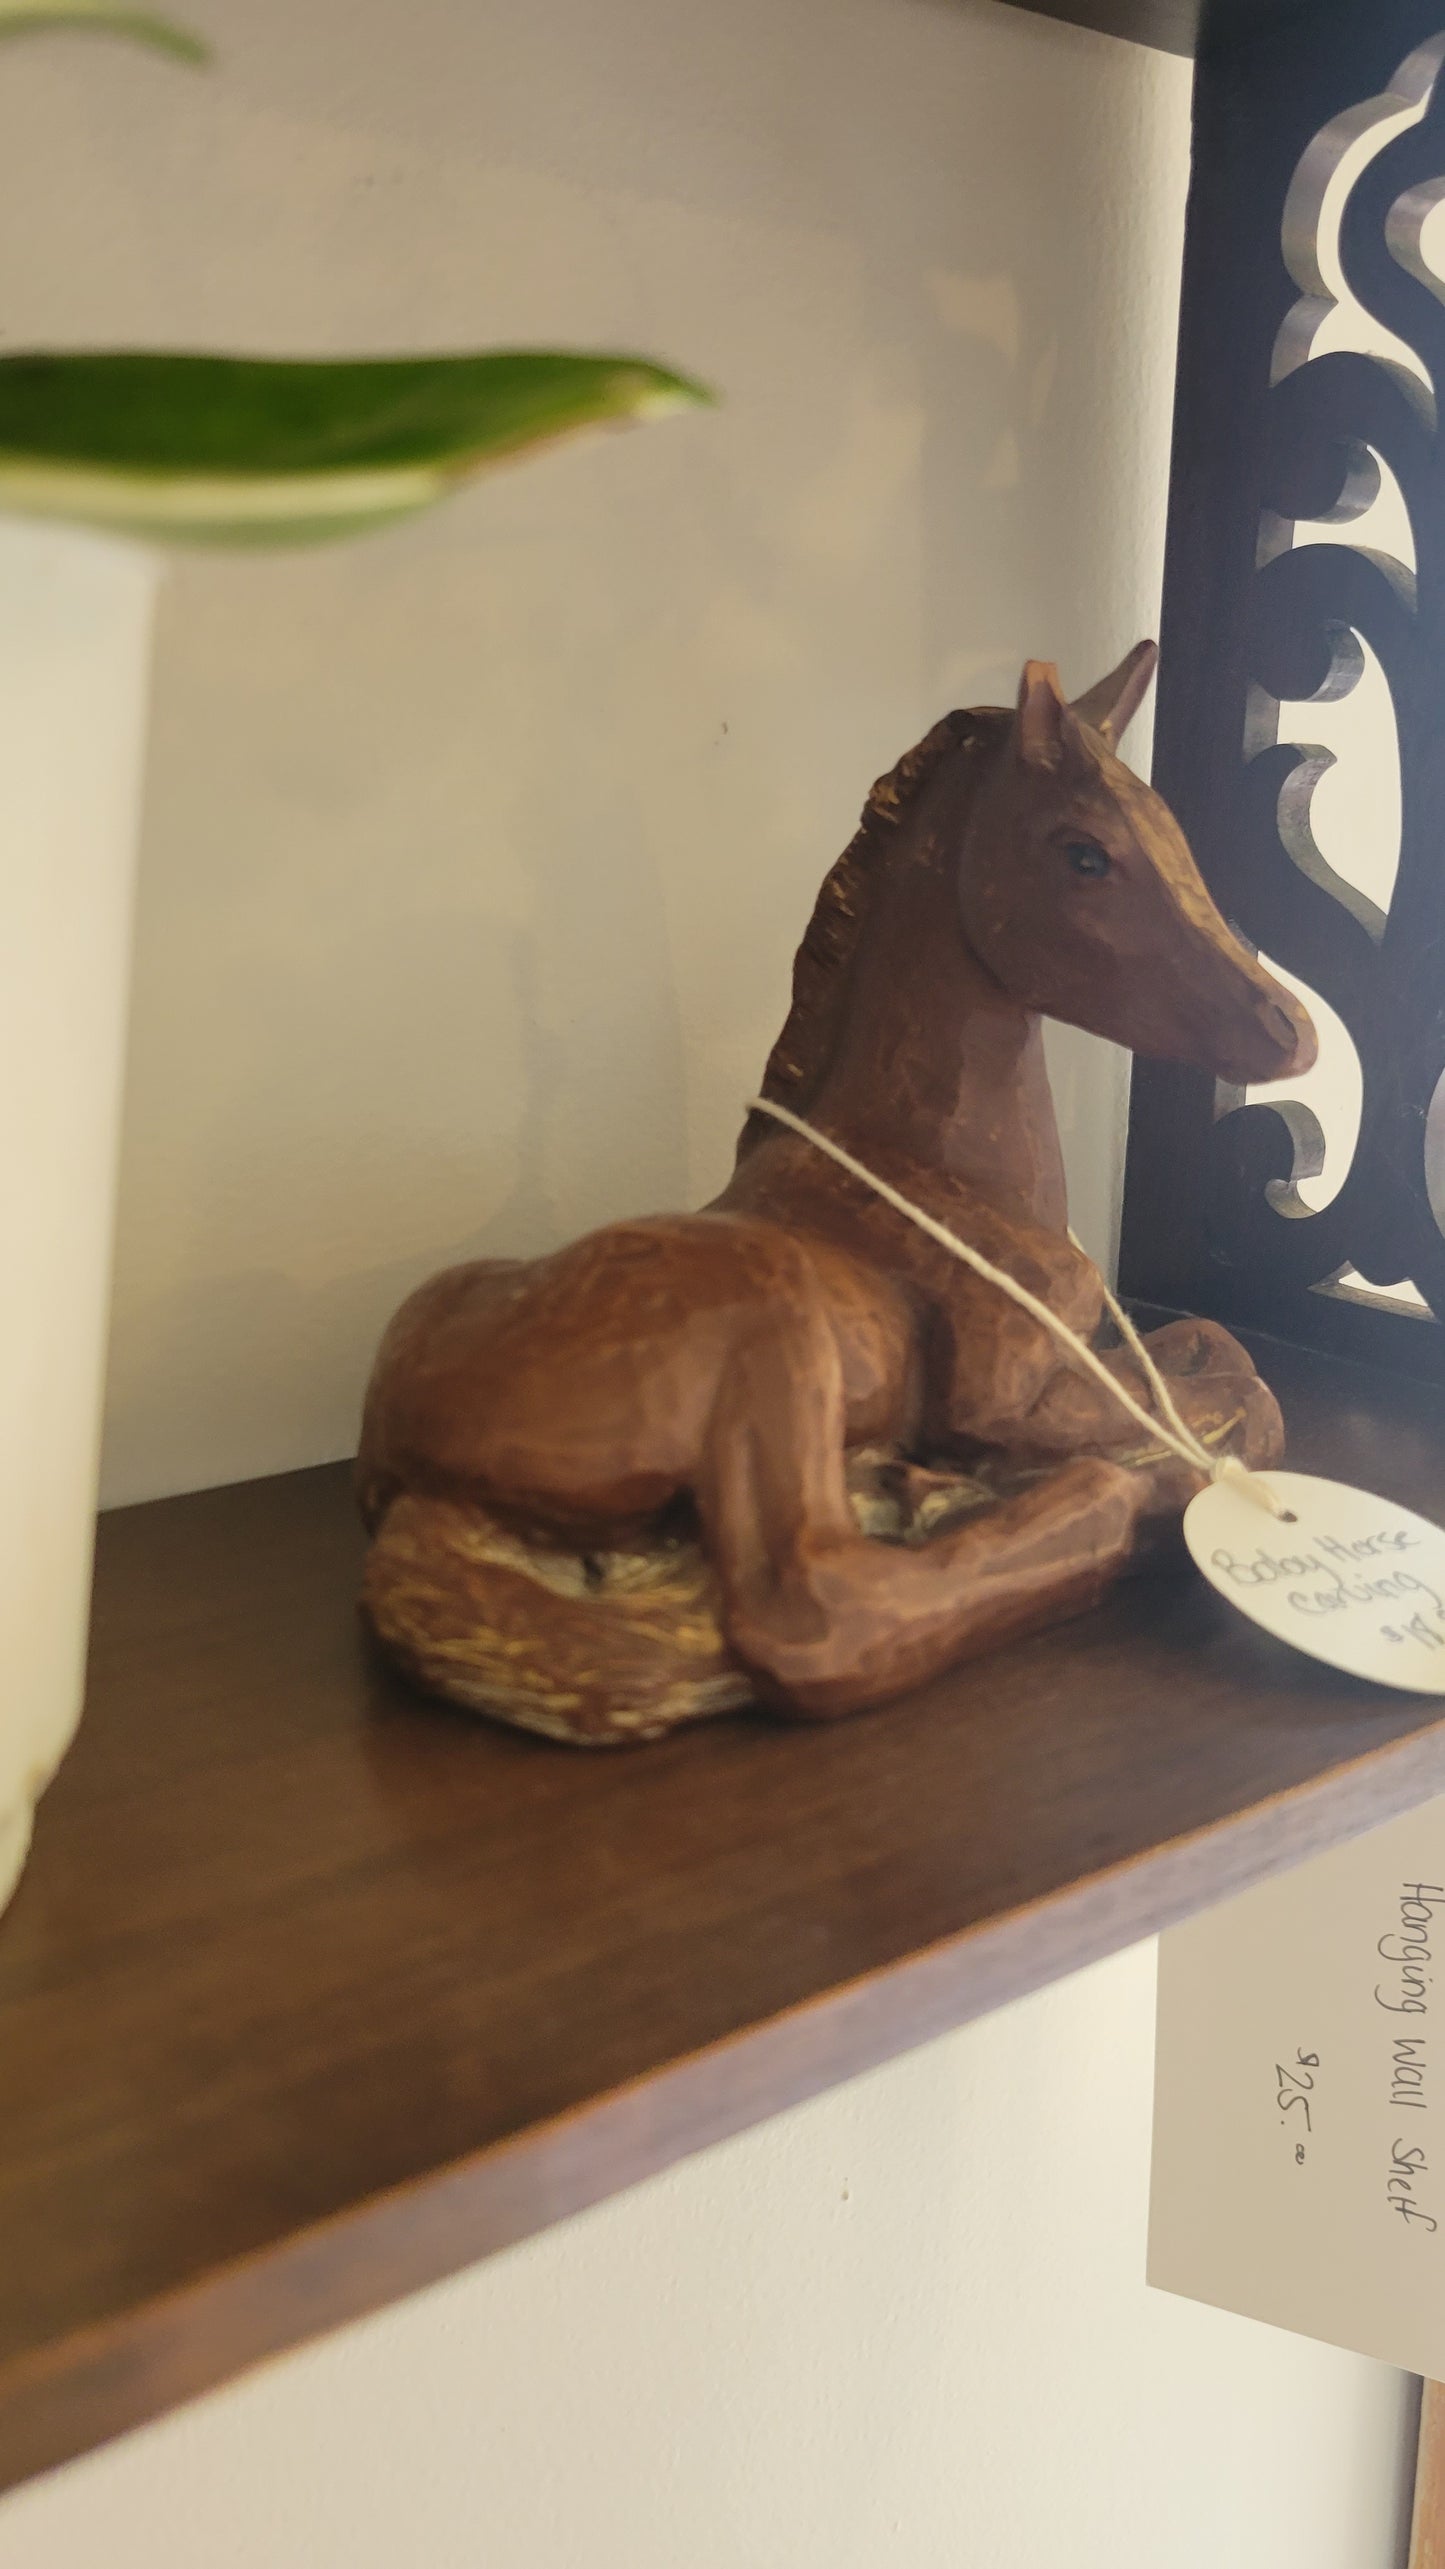 Wood carved horse/foal